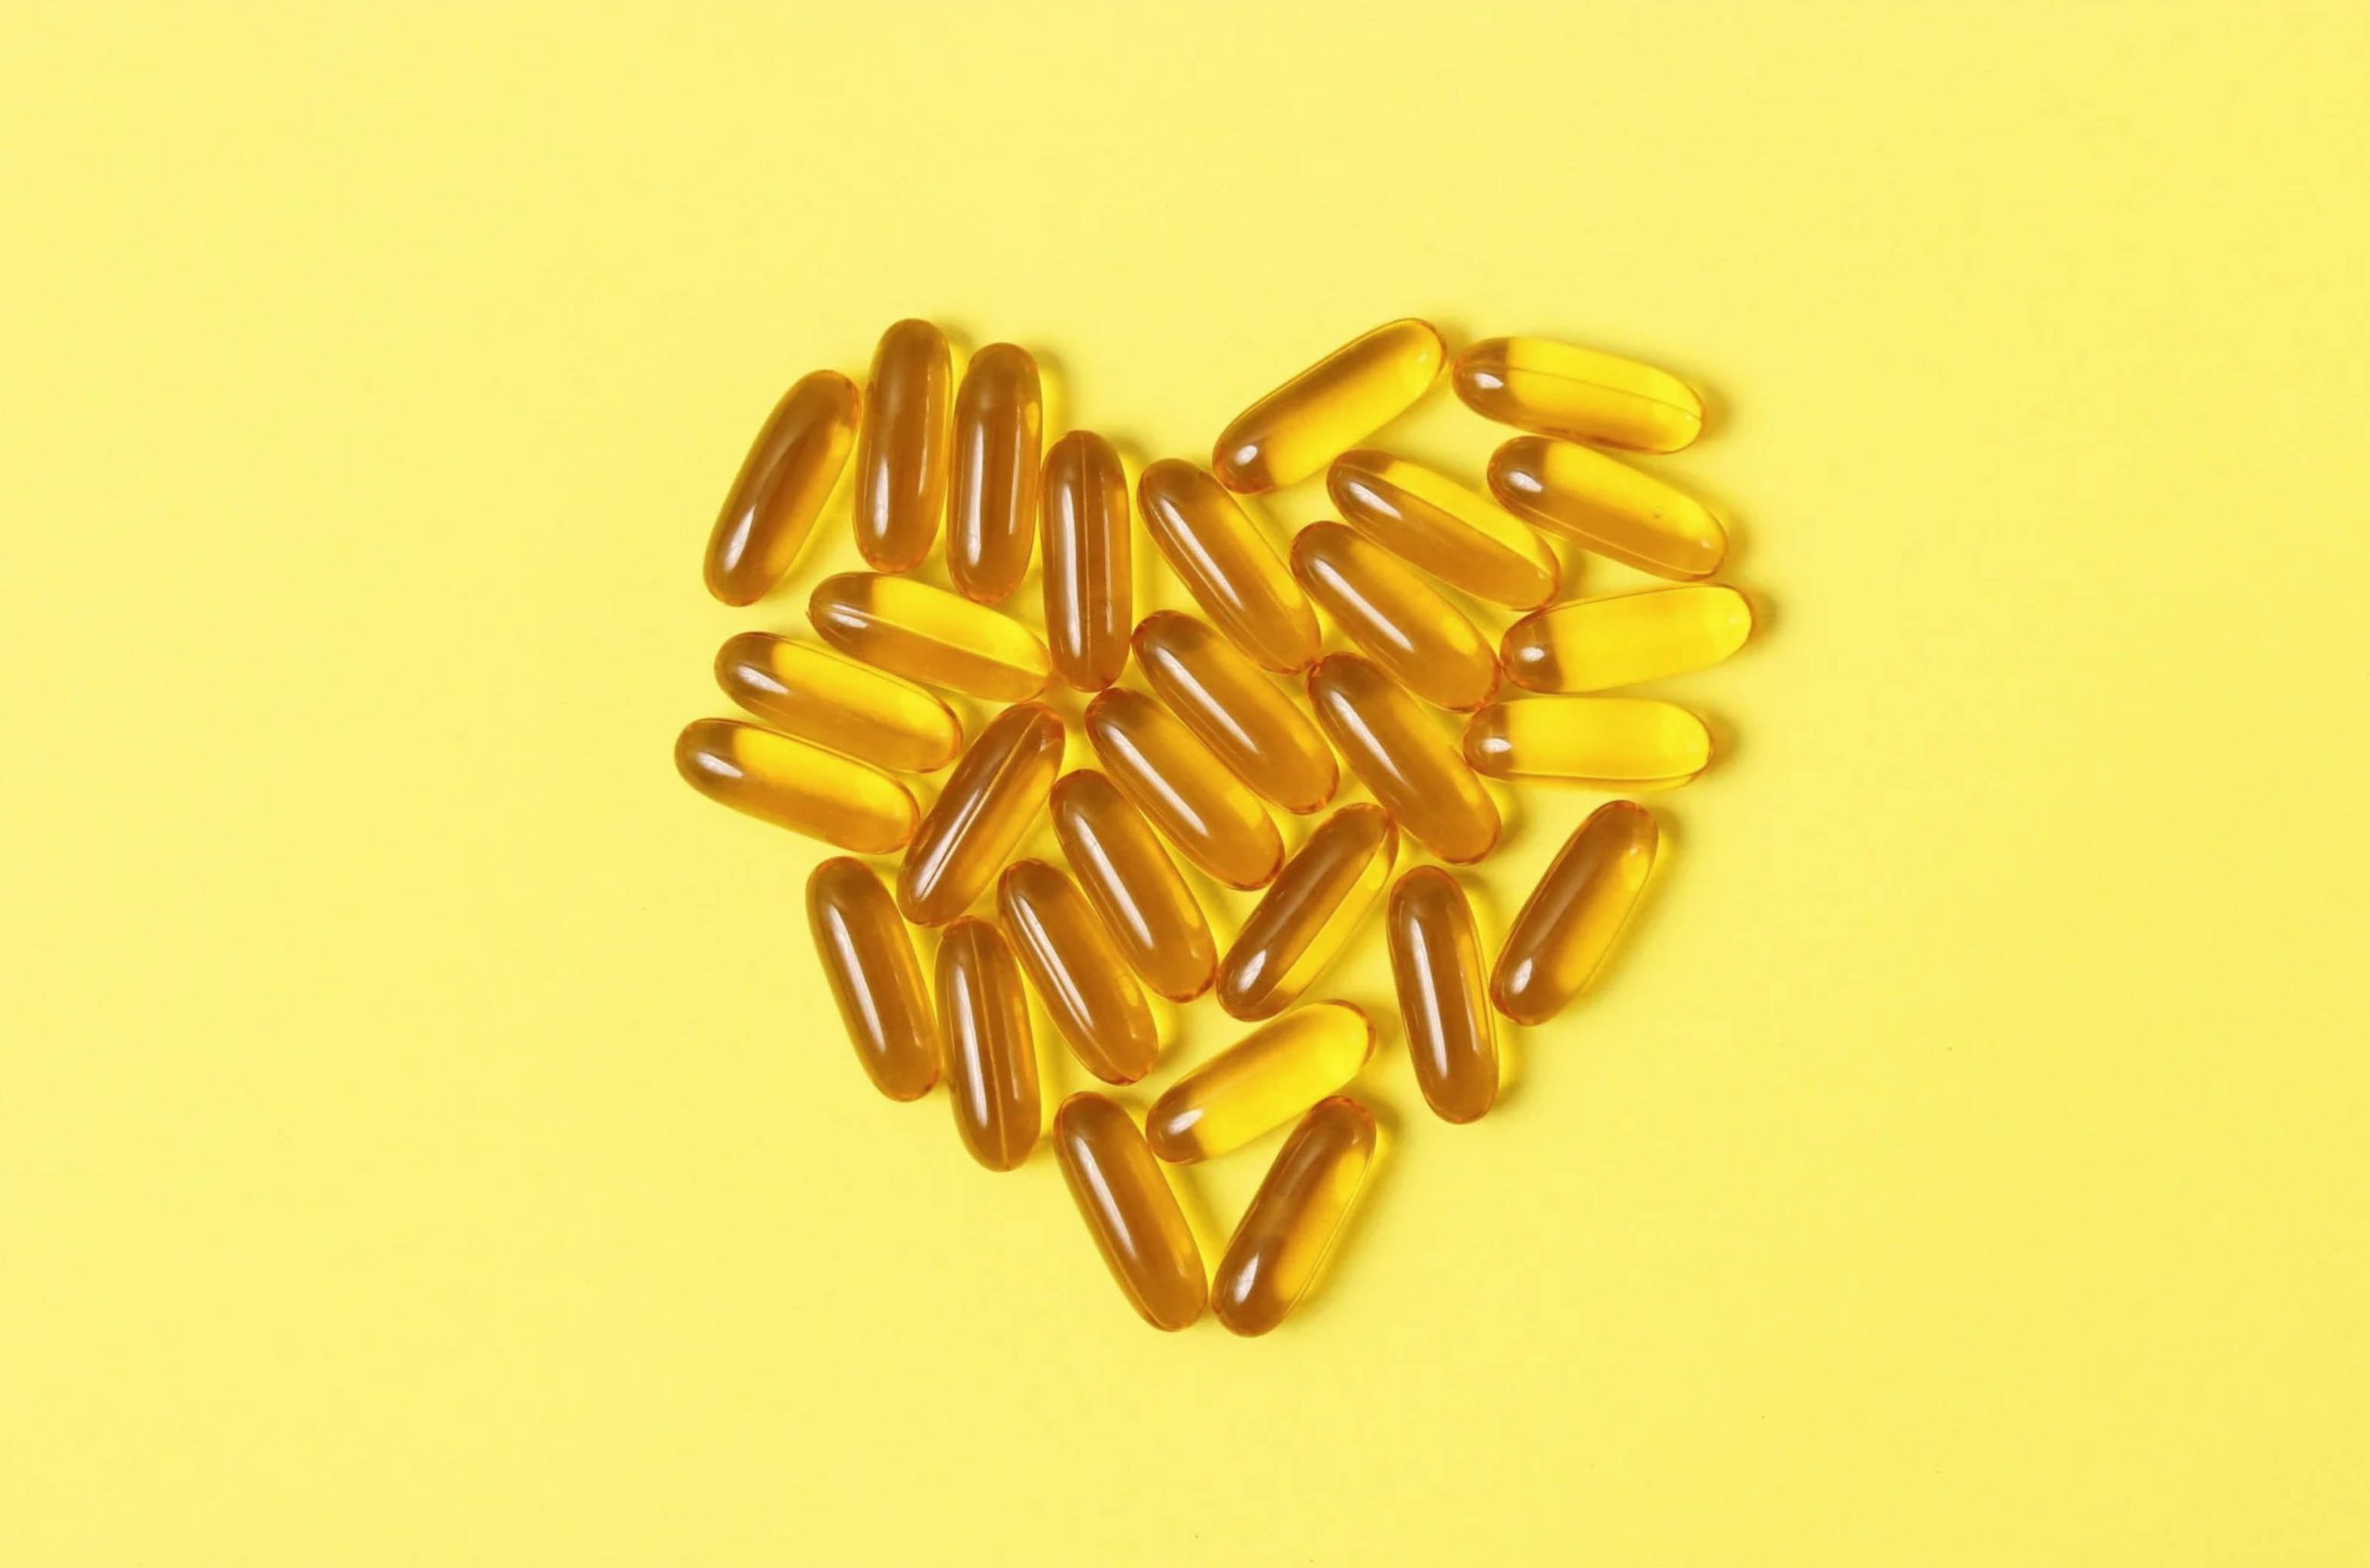 ACGrace - Heart shaped fish oil capsules on a yellow background.